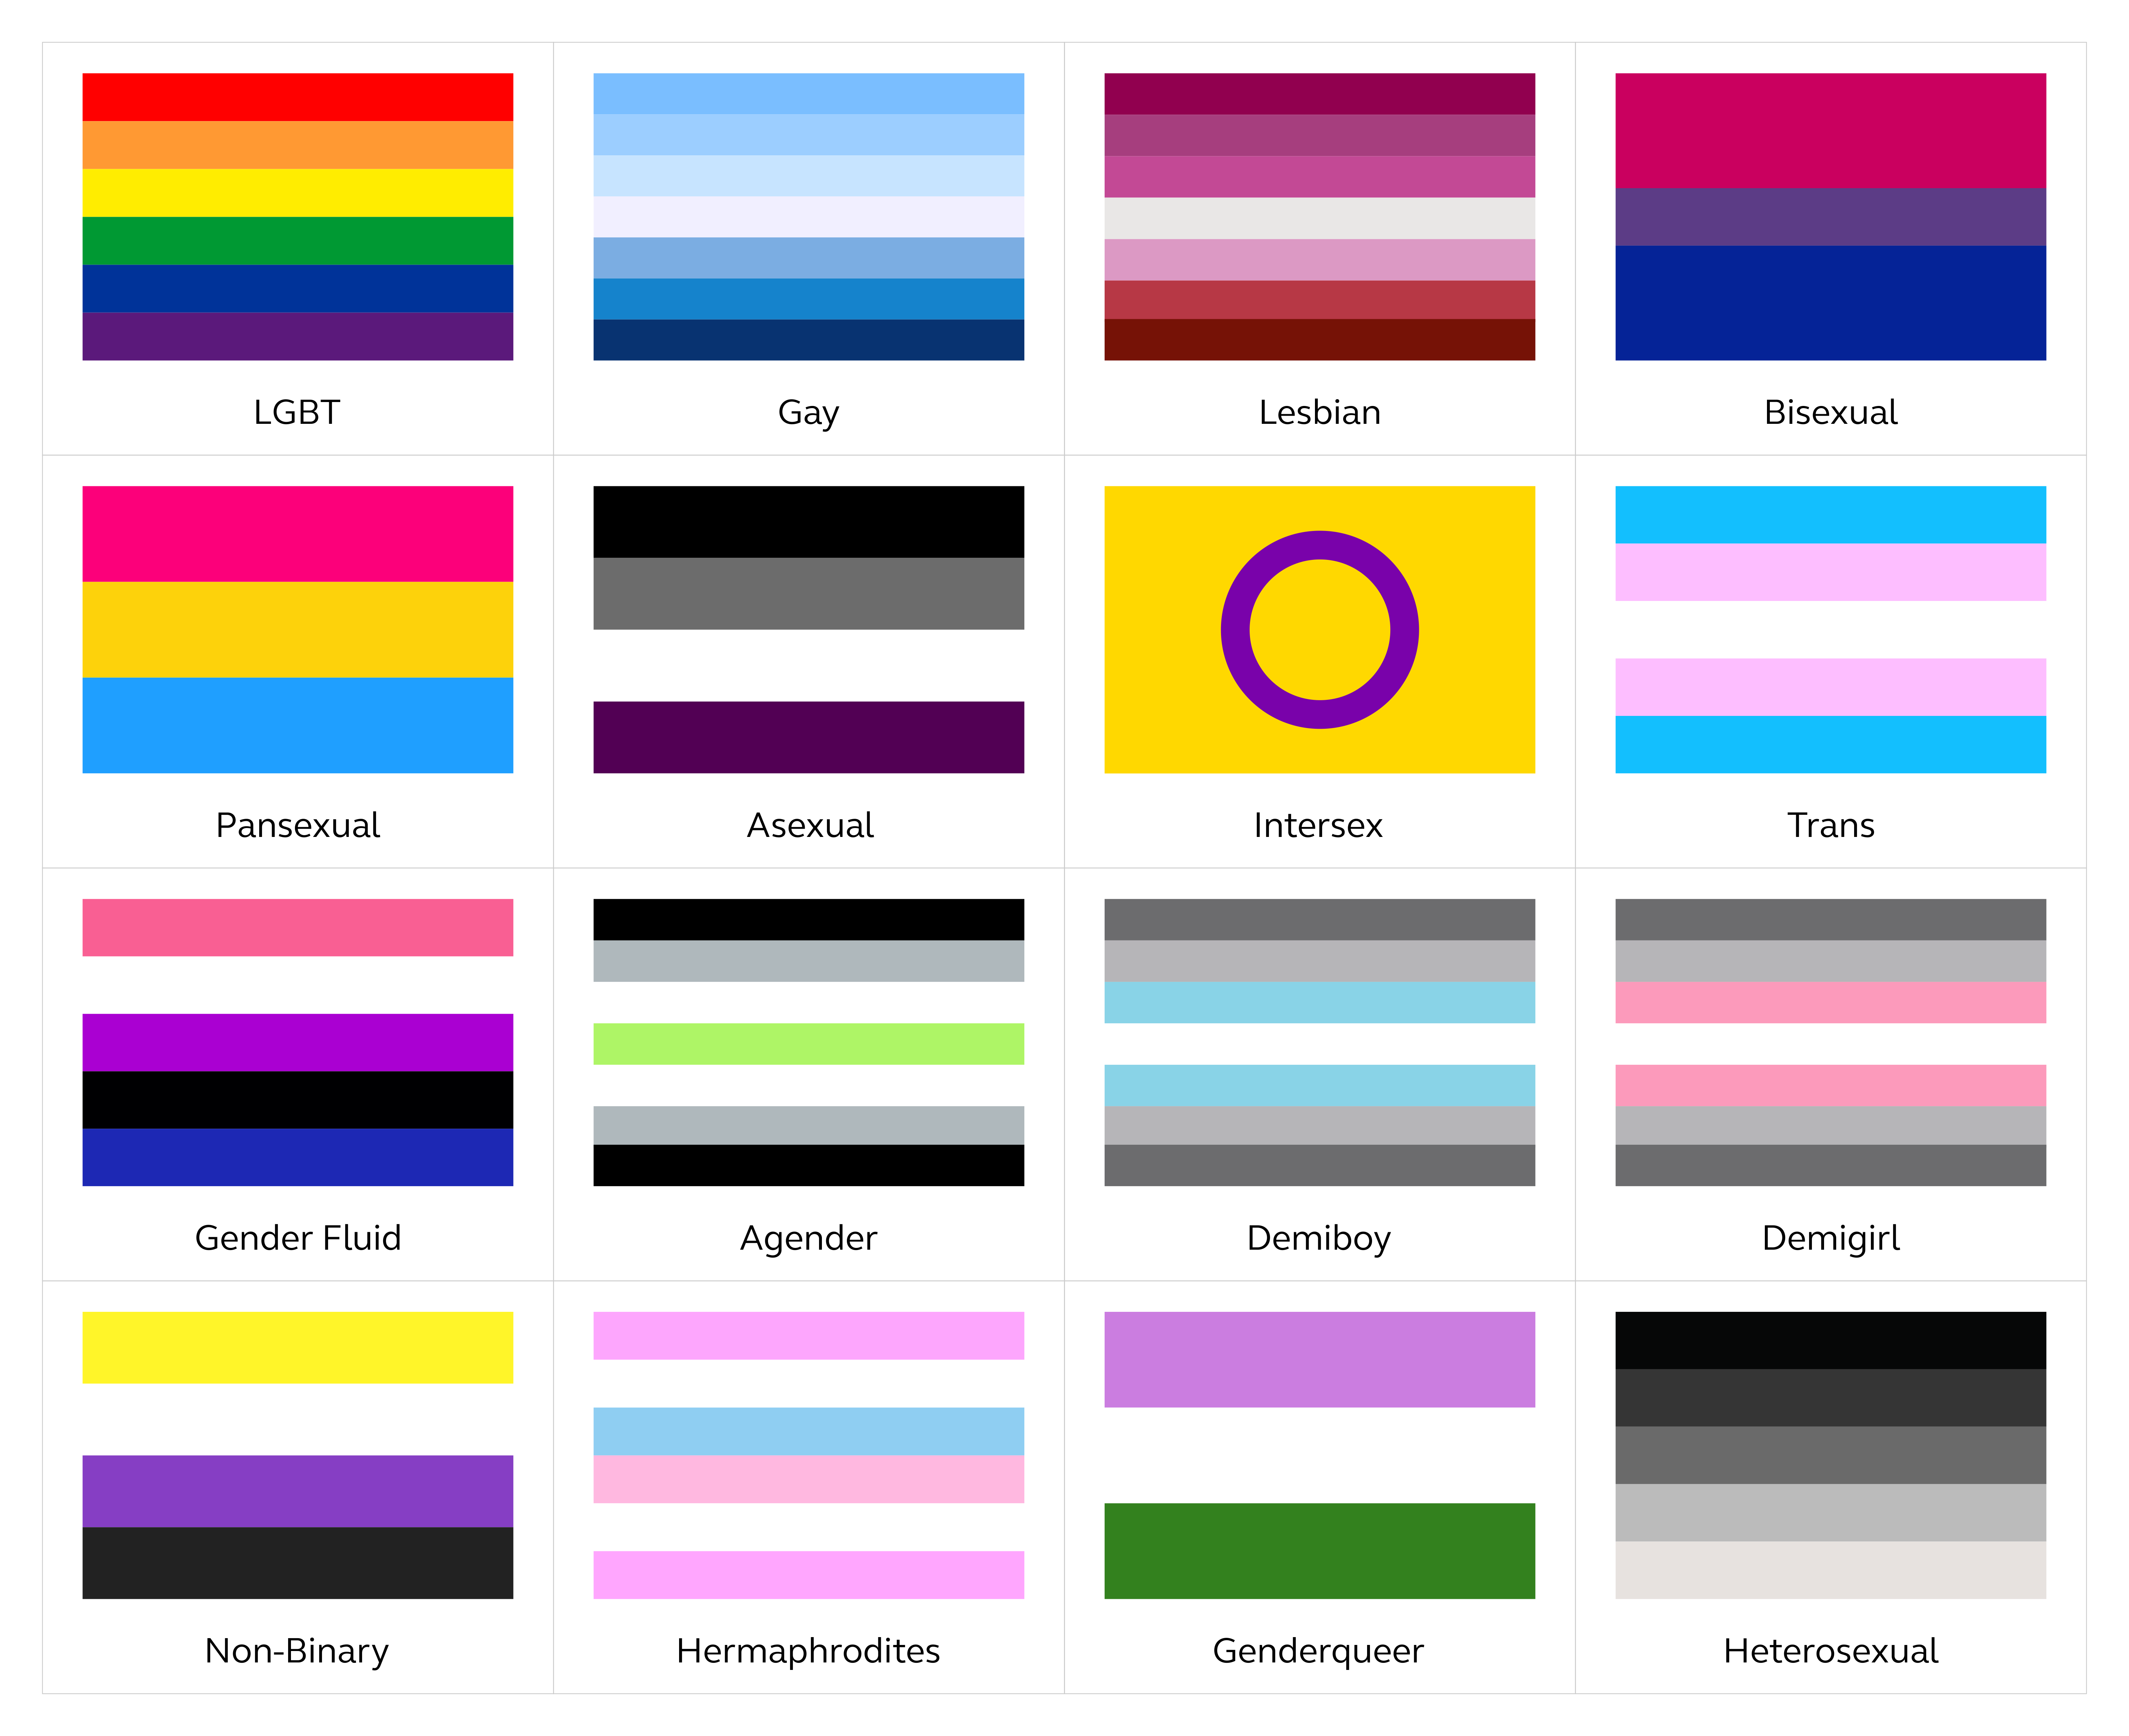 File:LGBT Pride Flags.png - Wikimedia Commons